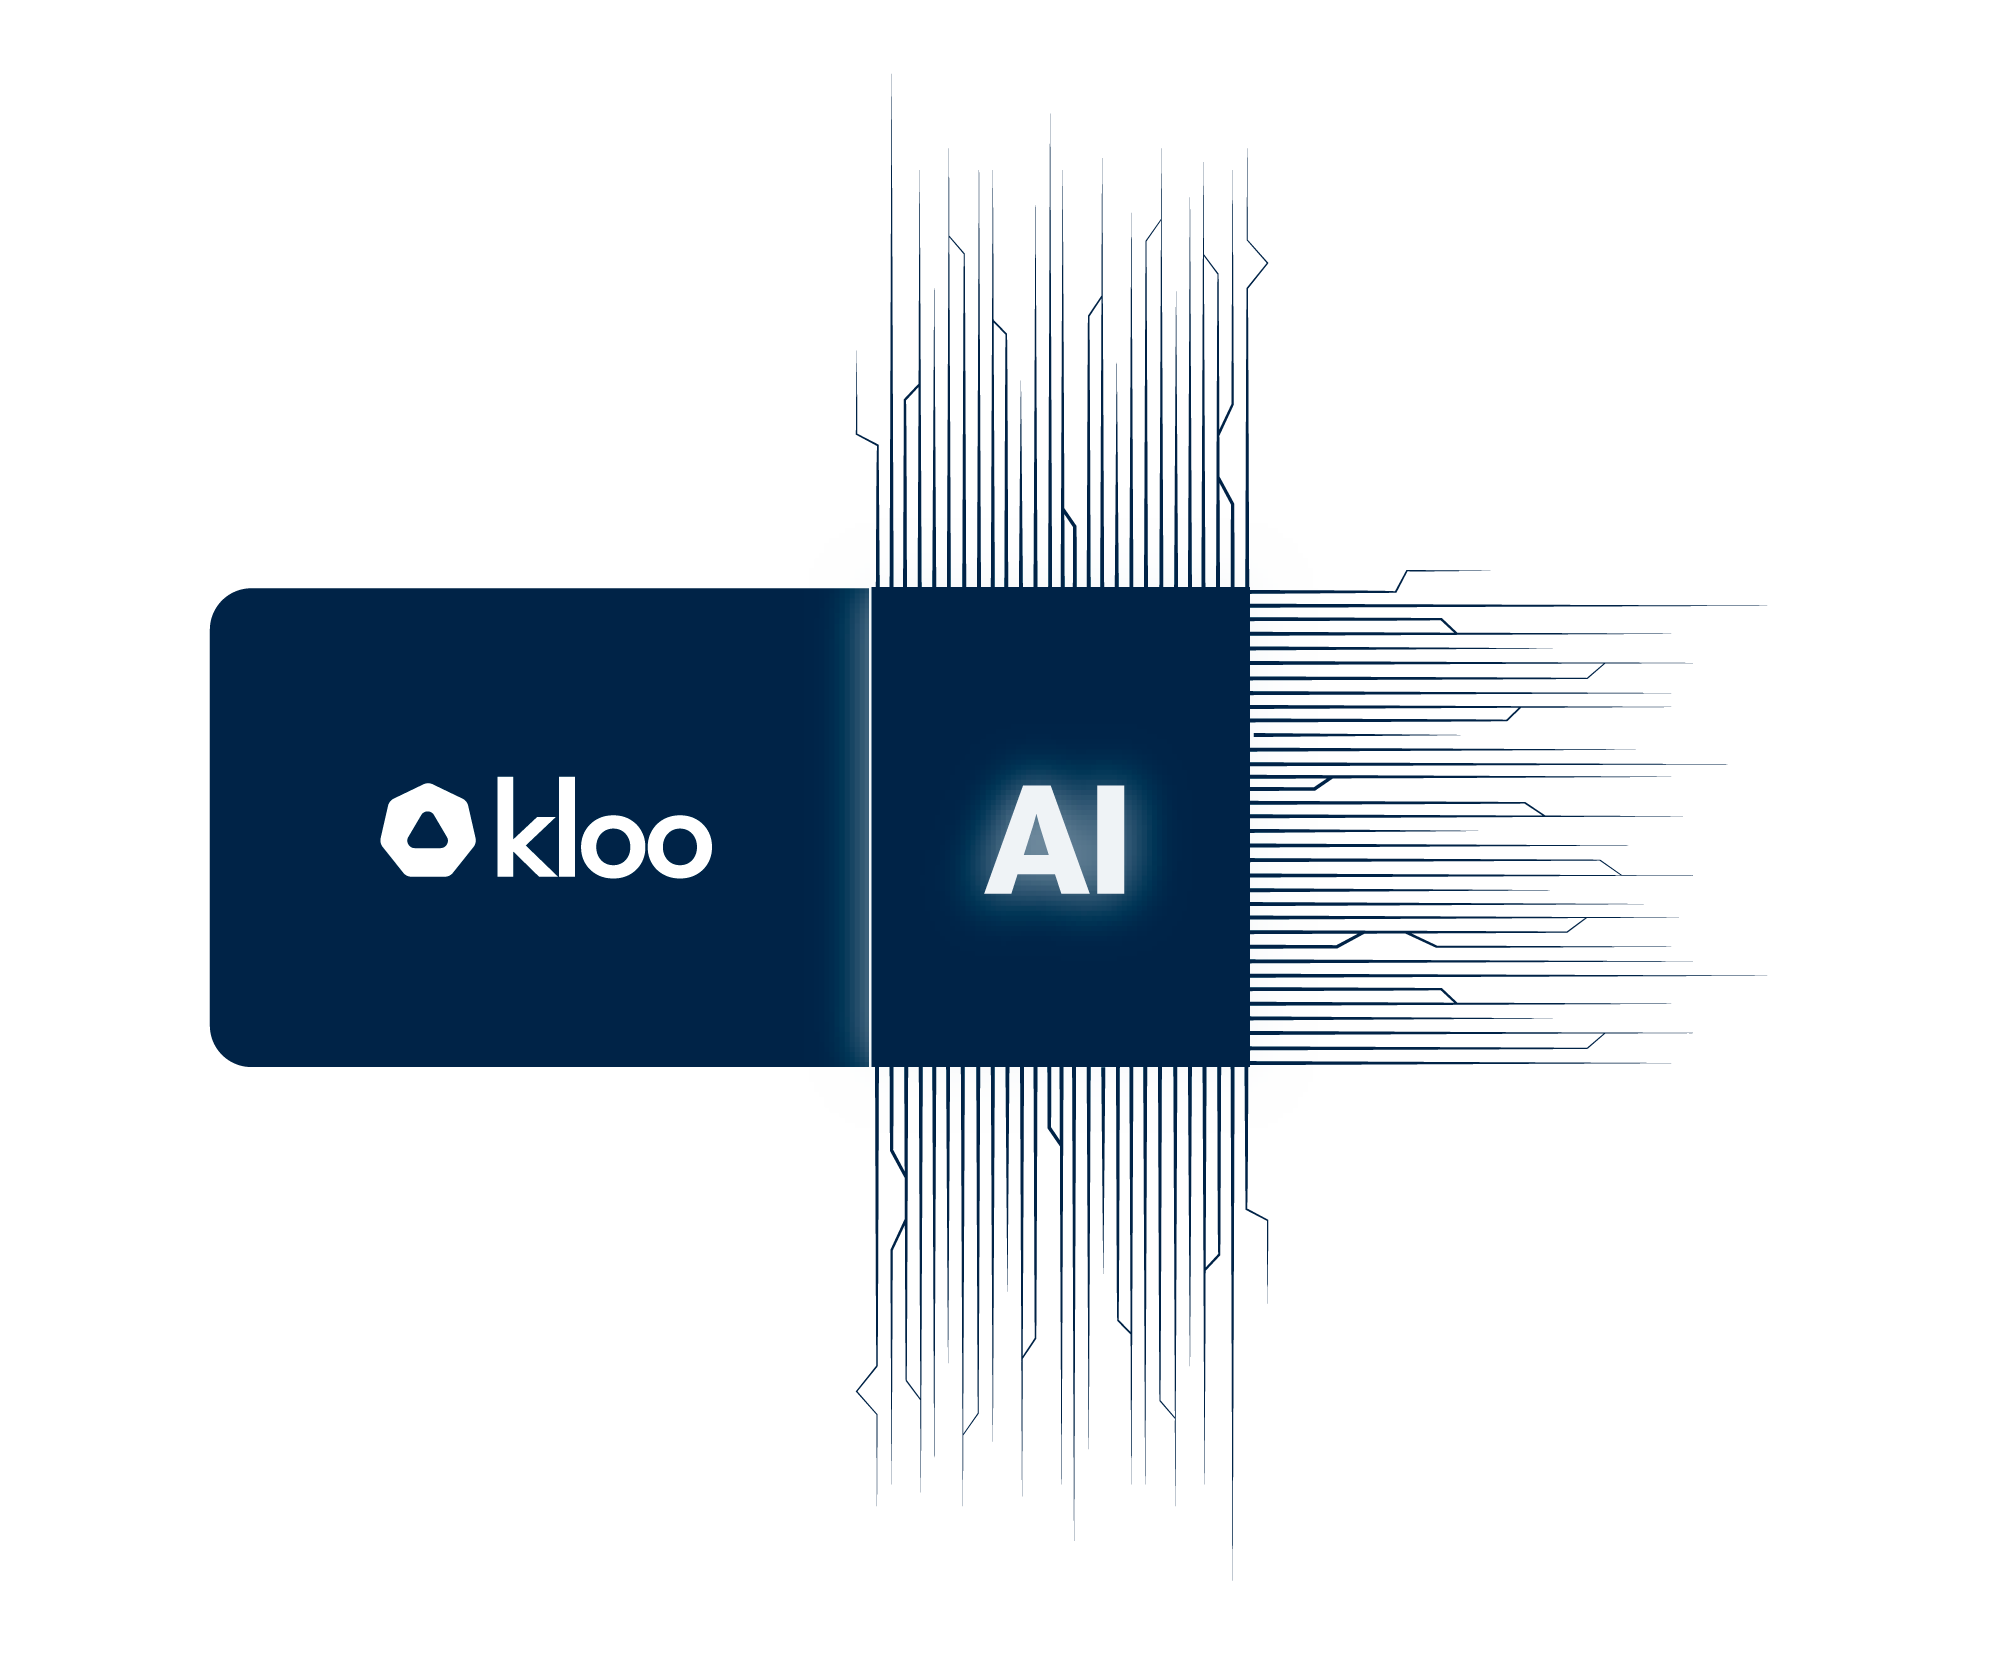 Graphic showing Kloo's AI capabilities